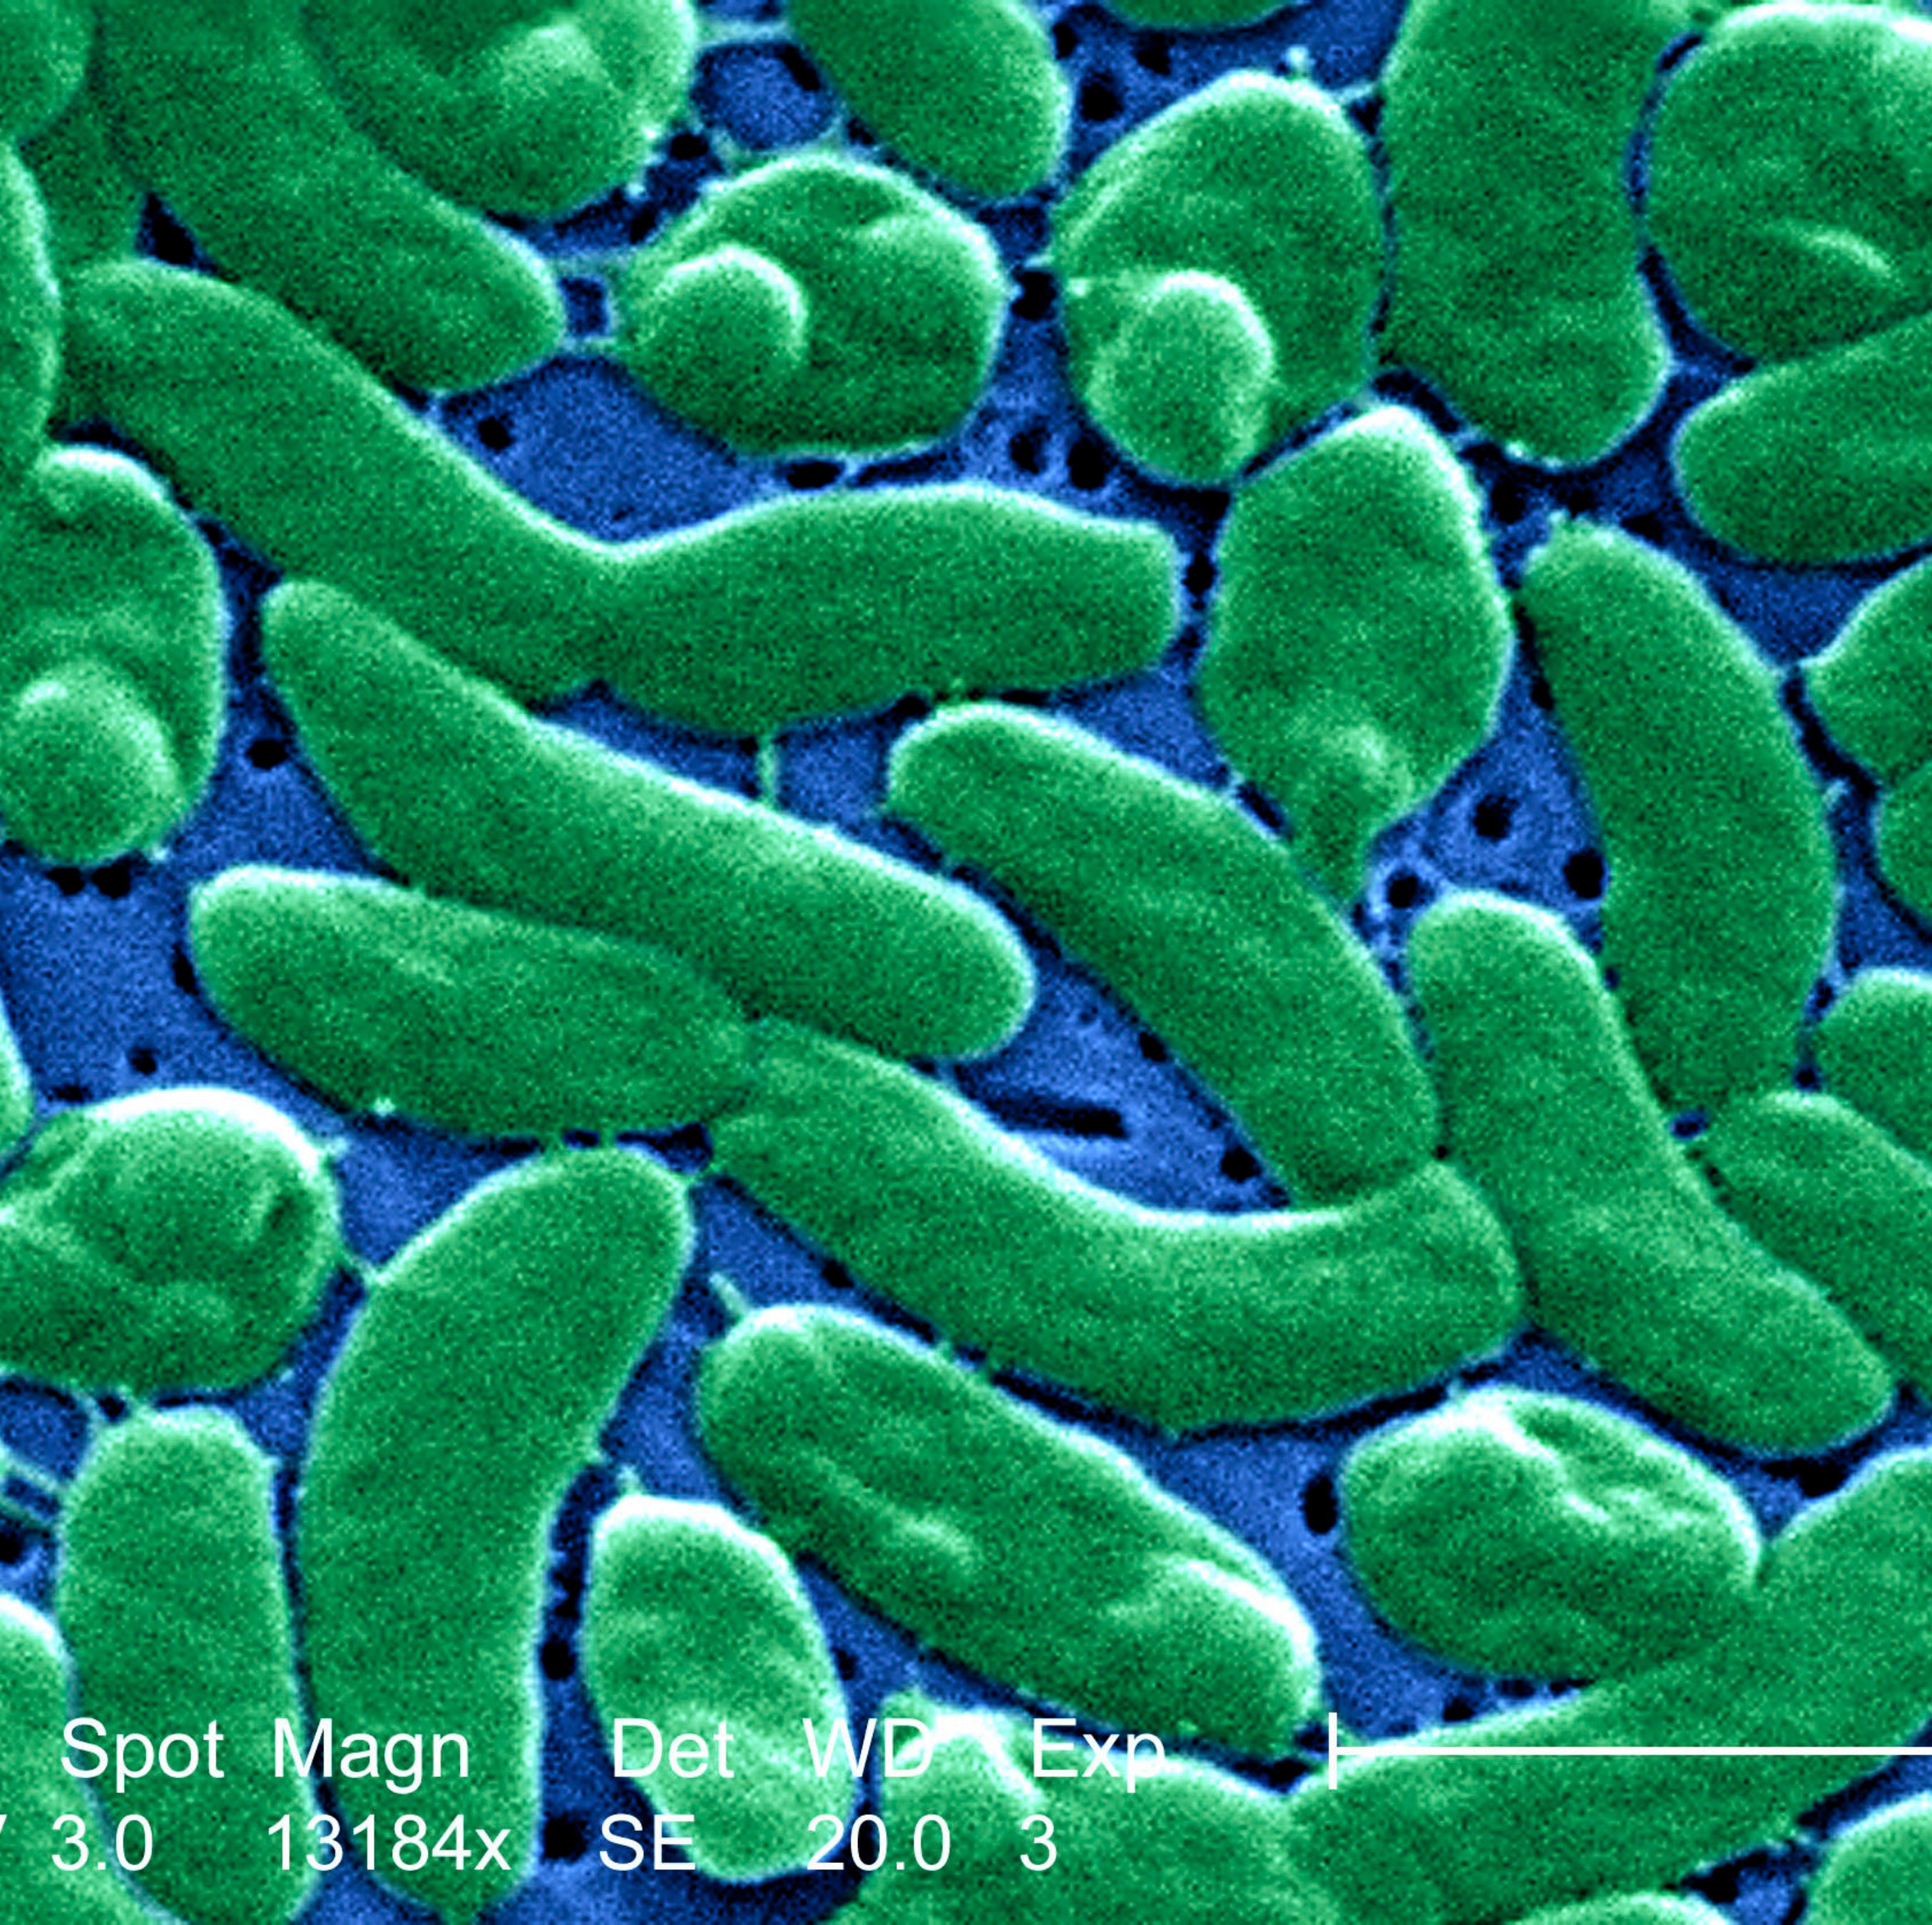 This scanning electron micrograph, SEM, depicts a grouping of Vibrio vulnificus bacteria; Magnified 13184x. Vibrio vulnificus is a bacterium in the same family as those that cause cholera. It normally lives in warm seawater and is part of a group of vibri